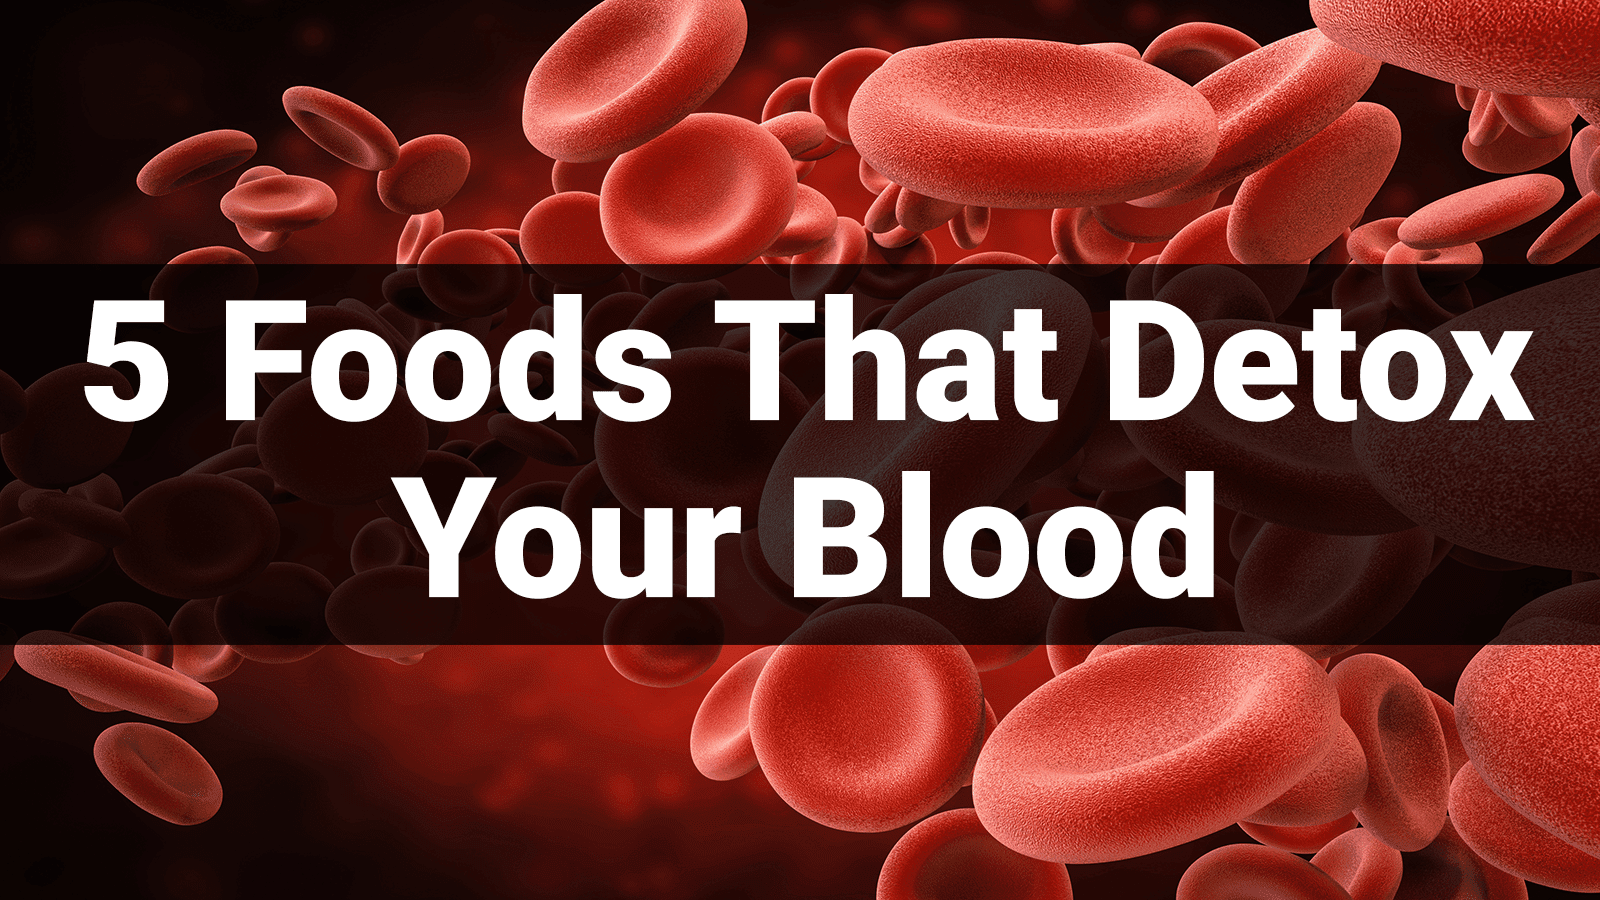 5 Foods that detox your blood